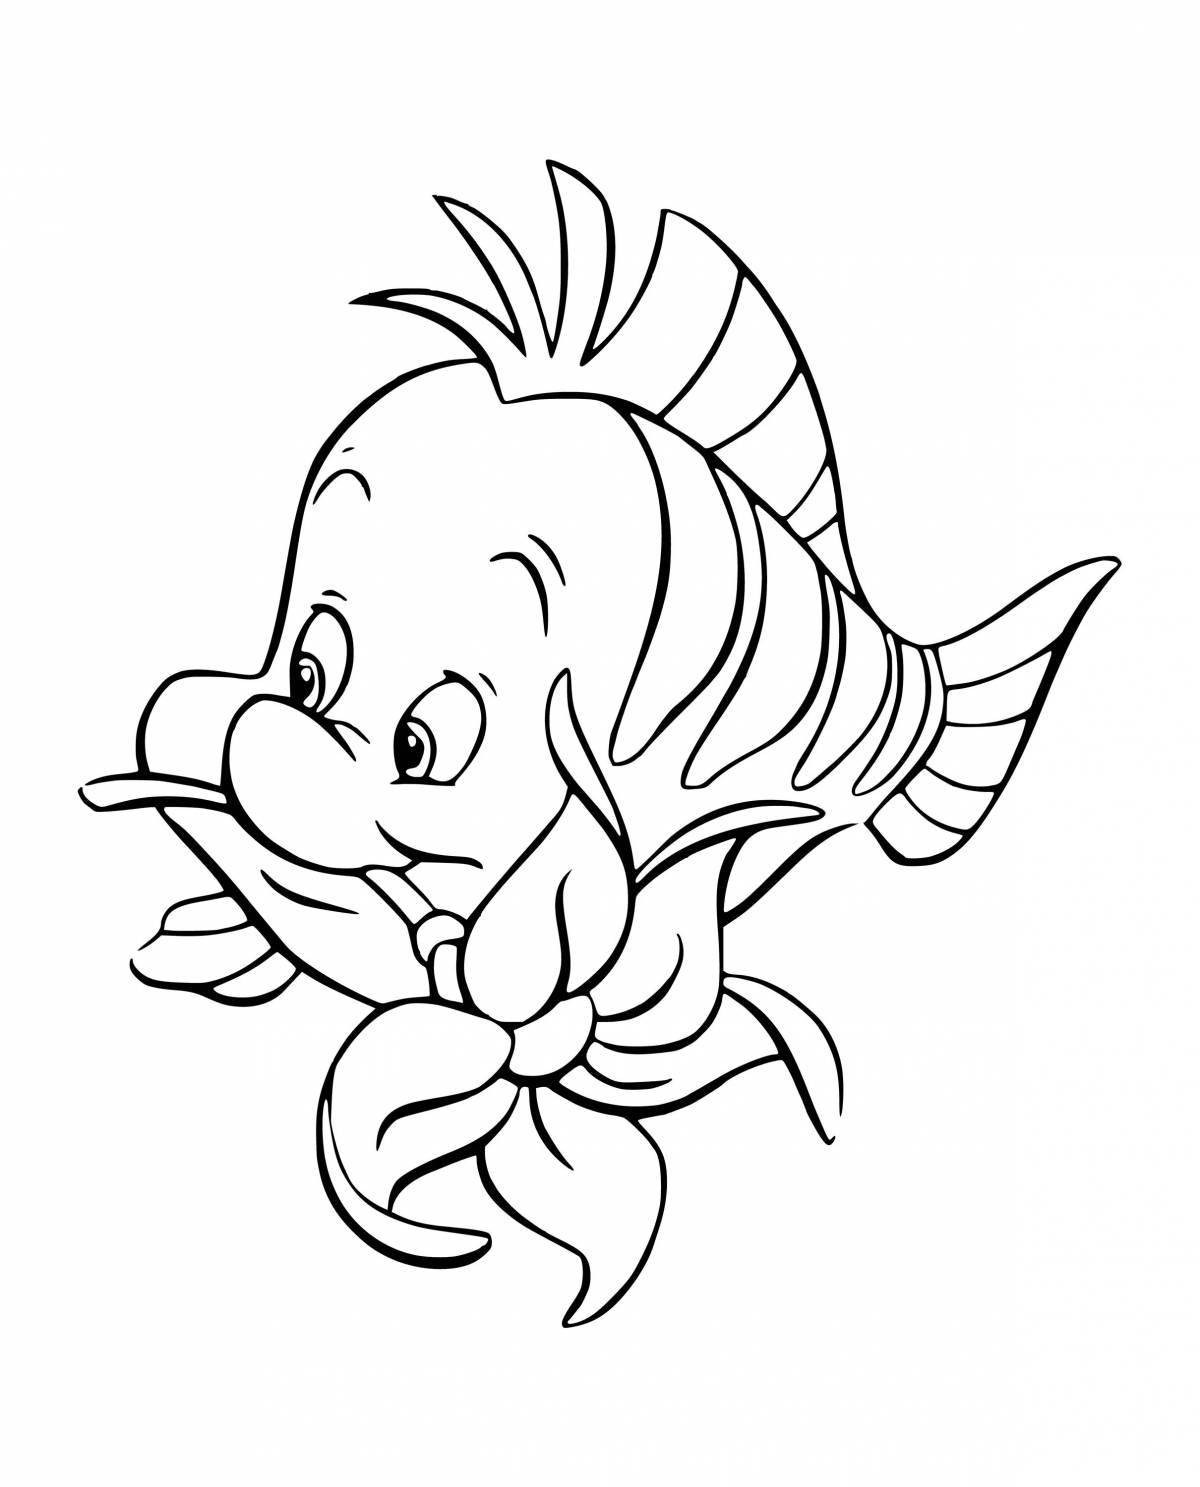 Solar float coloring page